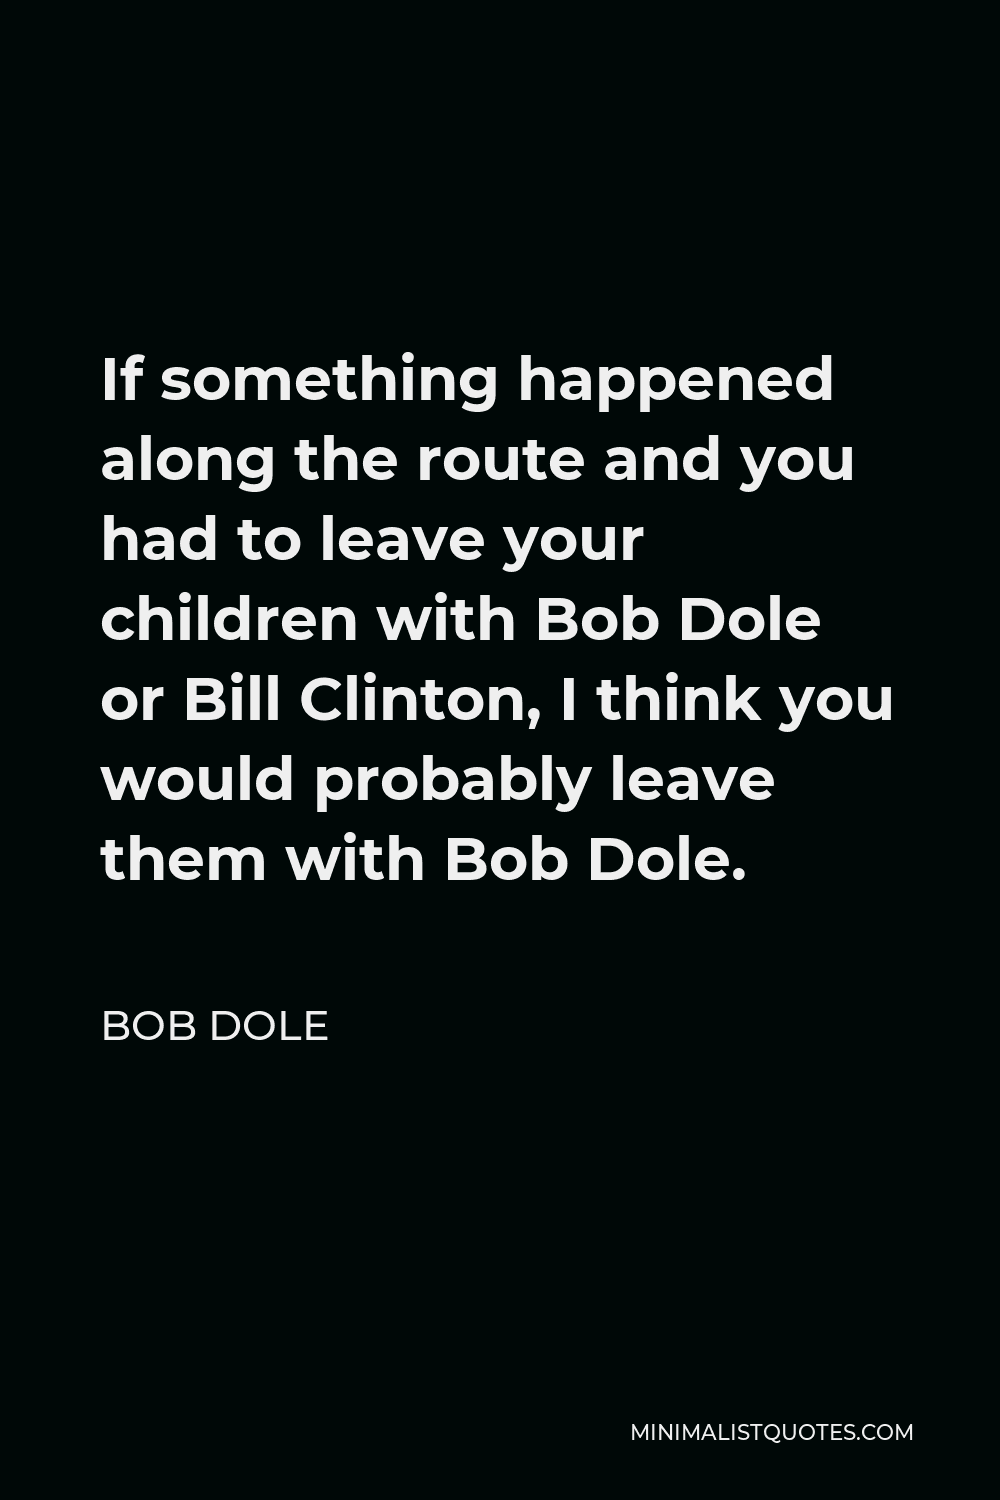 Bob Dole Quote - If something happened along the route and you had to leave your children with Bob Dole or Bill Clinton, I think you would probably leave them with Bob Dole.